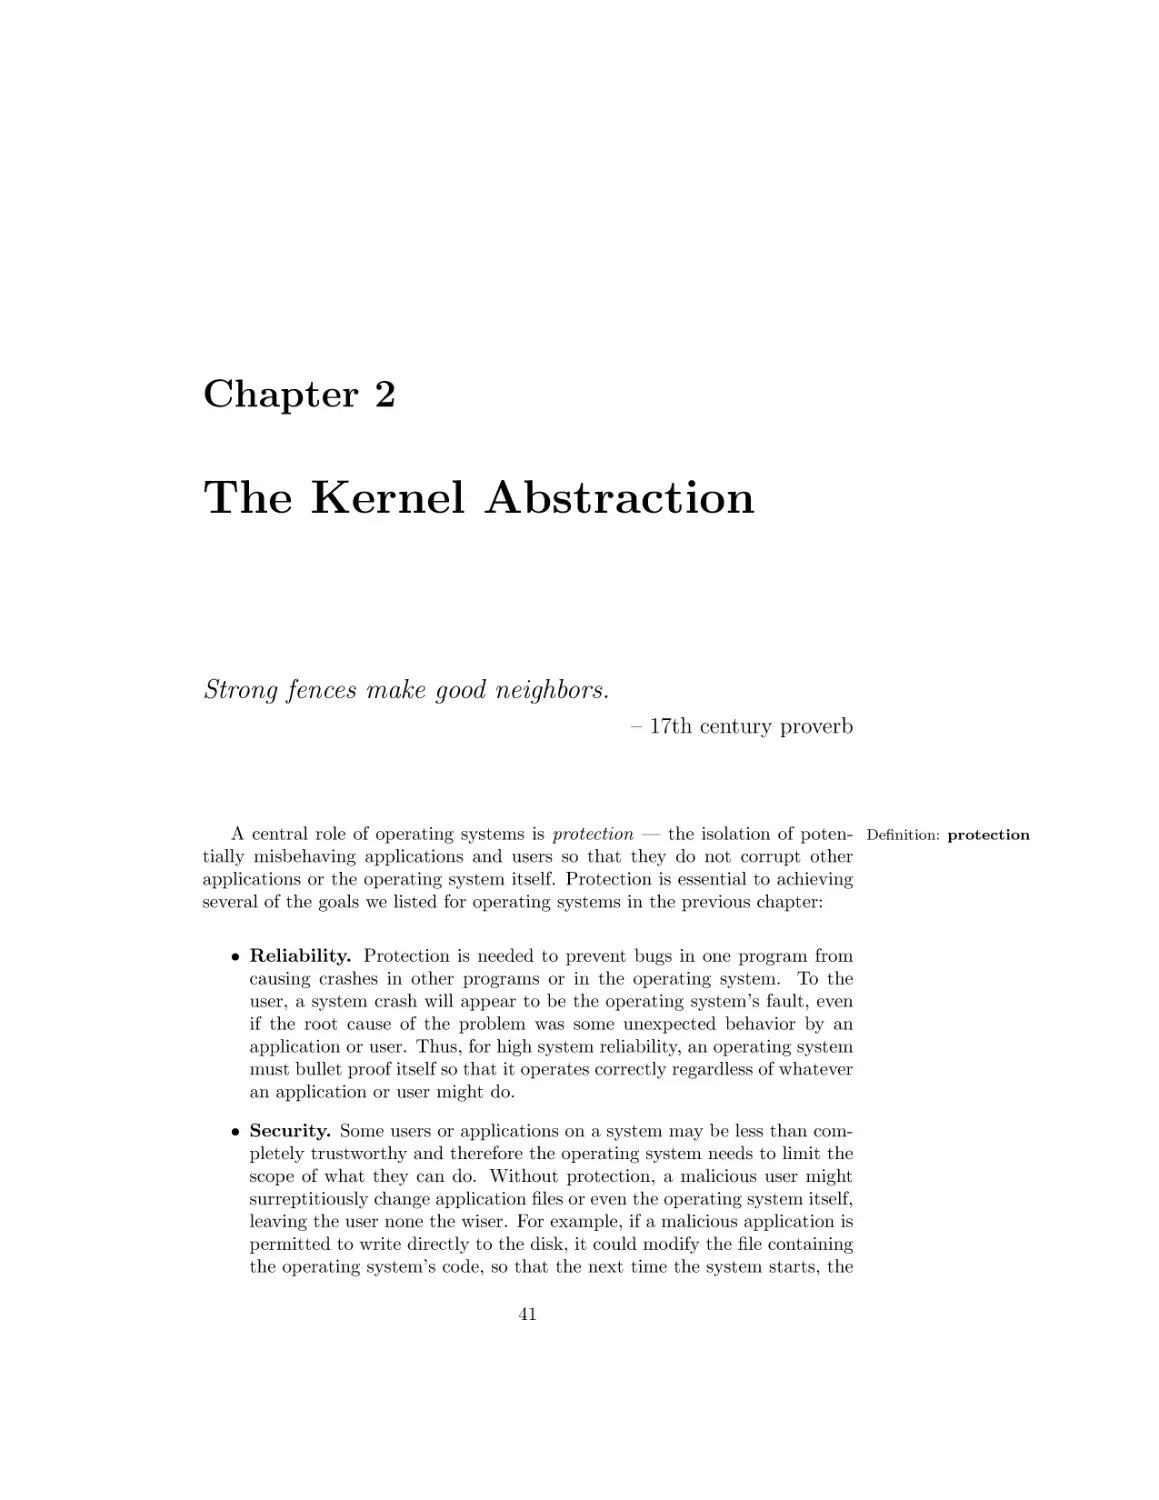 The Kernel Abstraction